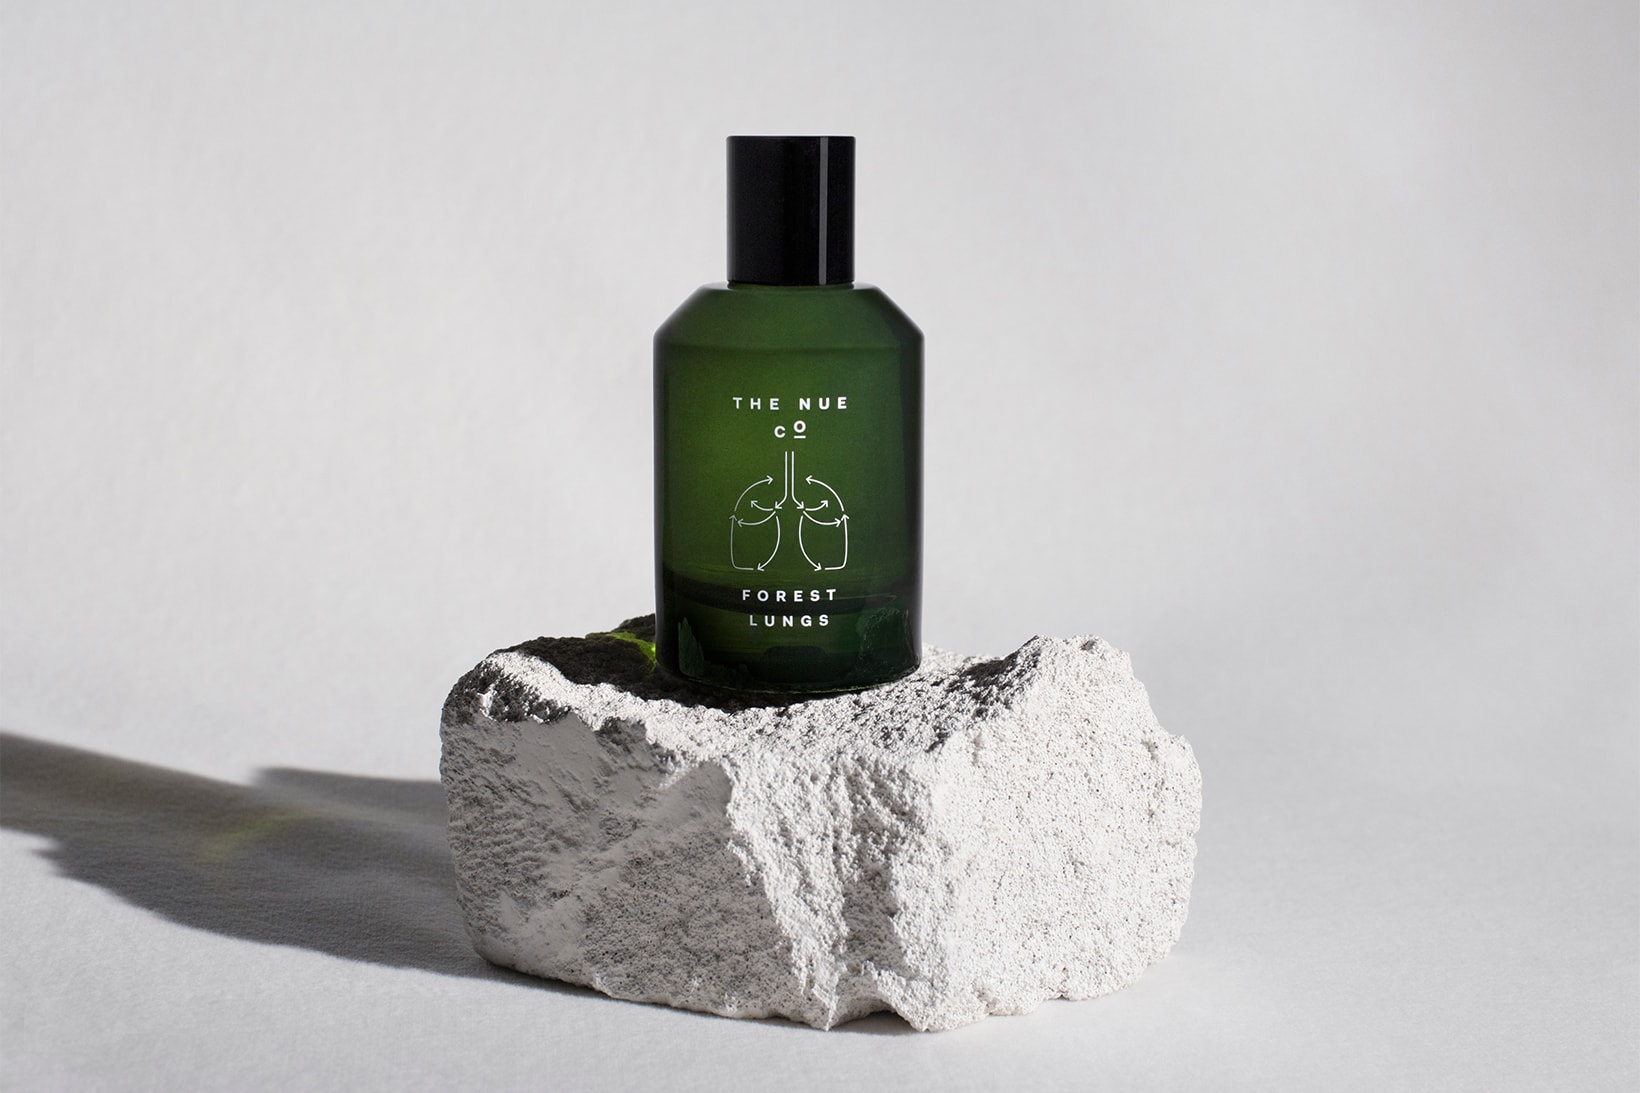 the nue co forest lungs perfume fragrance sustainable beauty 